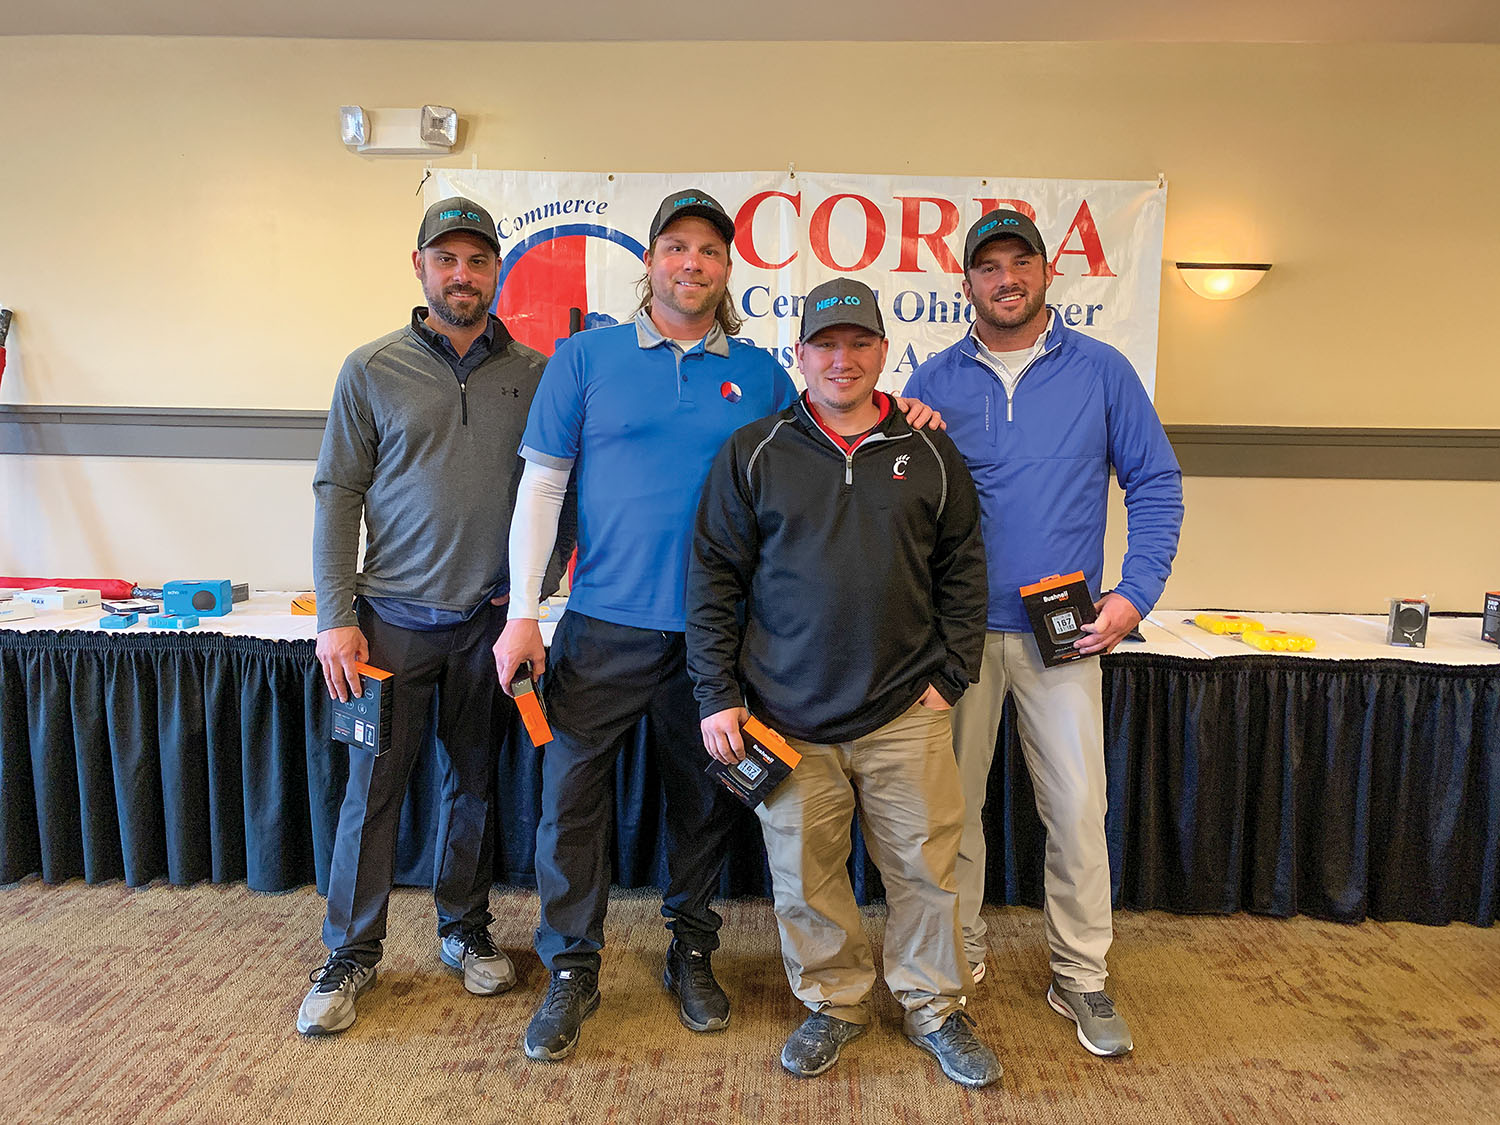 HEPACO sponsored the winning team for CORBA’s annual golf outing. Team members were (from left) Mike Doll, Jeff Zand, Jason Sitterle and Adam Pennington. (Photo courtesy of Central Ohio River Business Association)